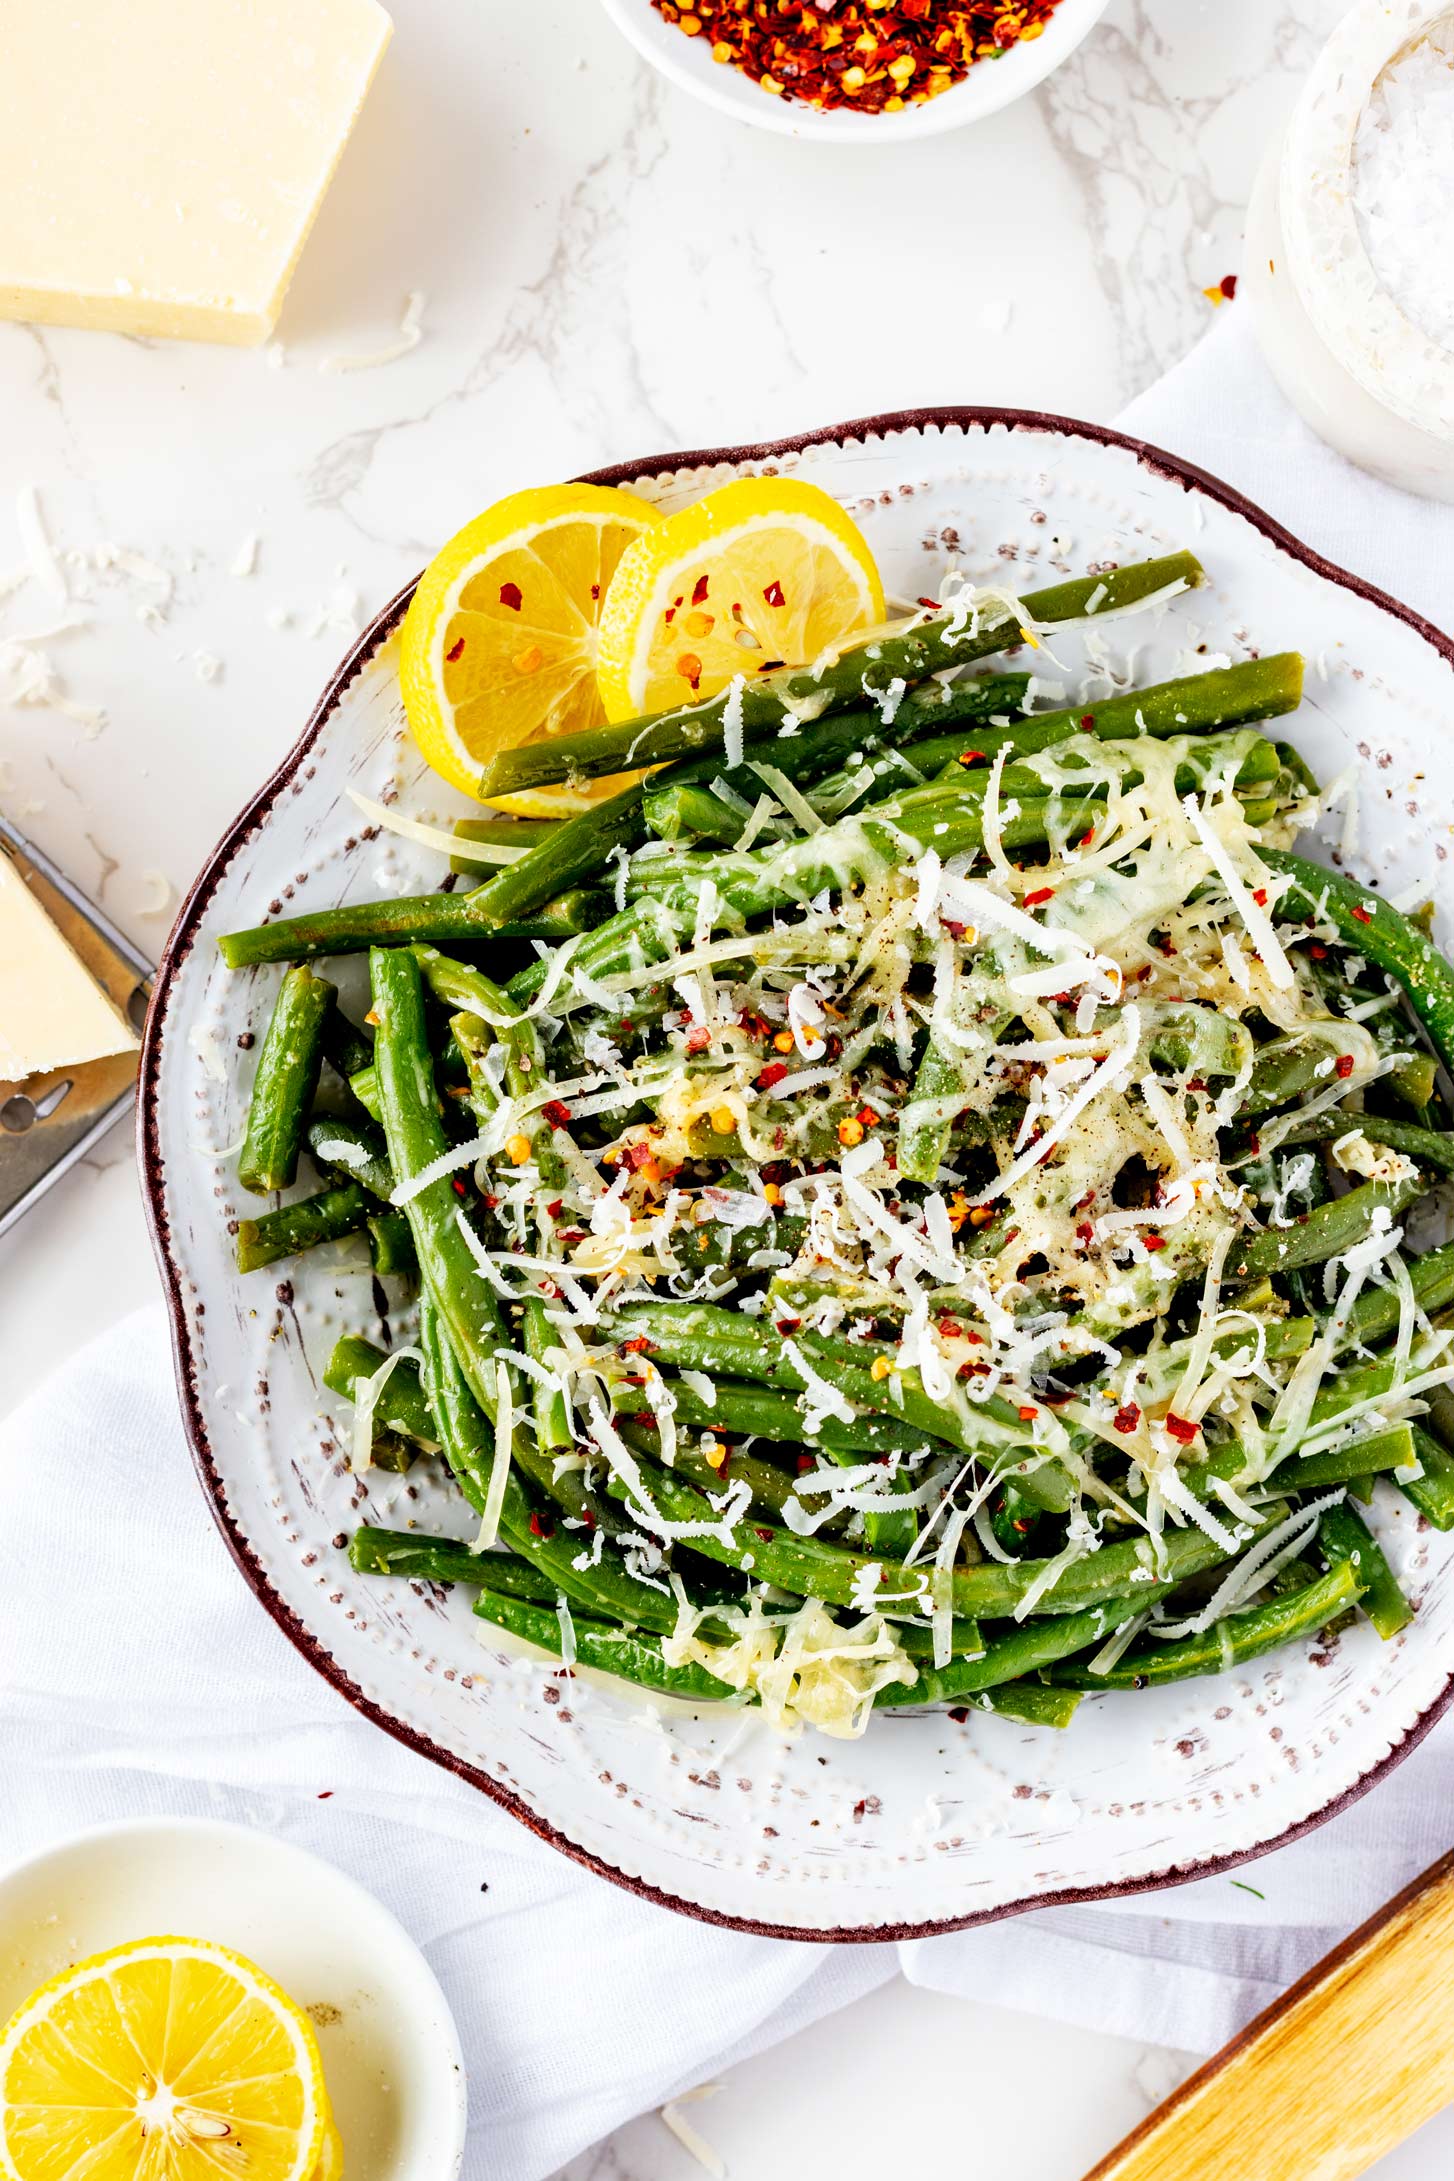 Overhead photo of a rustic plate with Ninja Foodi green beans garnished with crushed red pepper flakes.